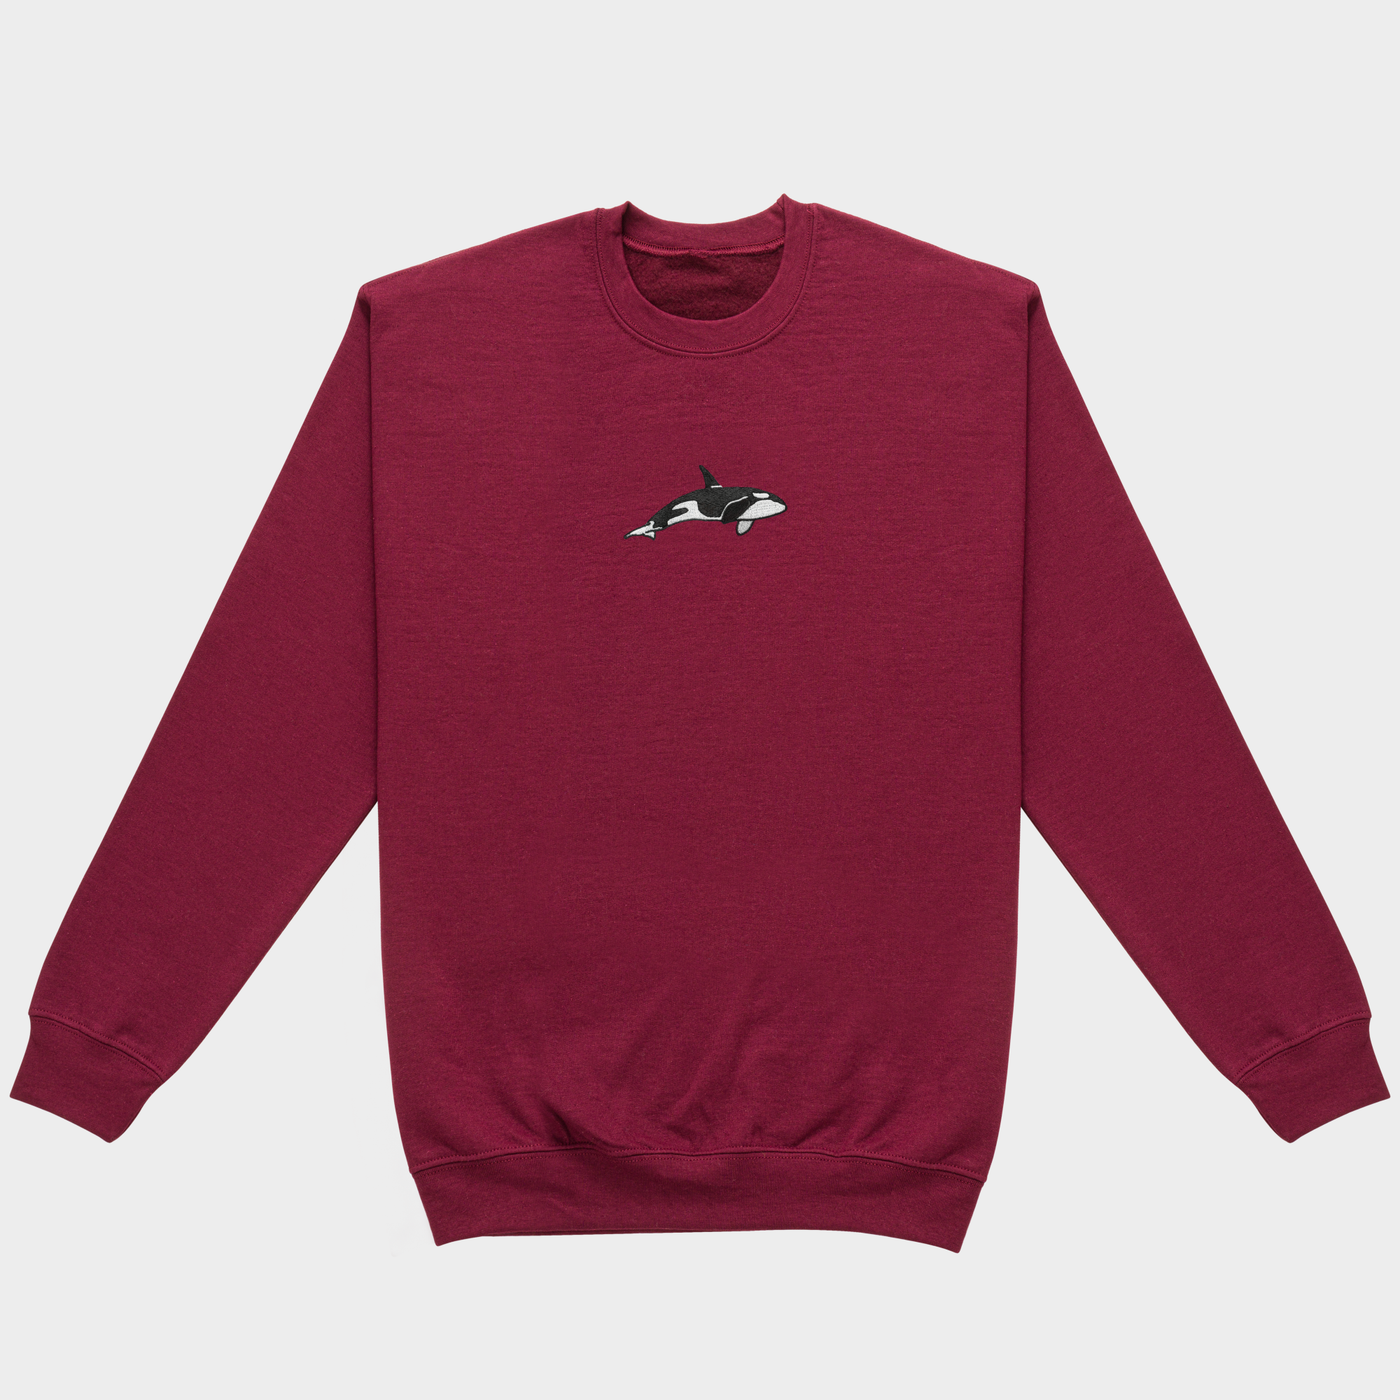 Bobby's Planet Men's Embroidered Orca Sweatshirt from Seven Seas Fish Animals Collection in Maroon Color#color_maroon